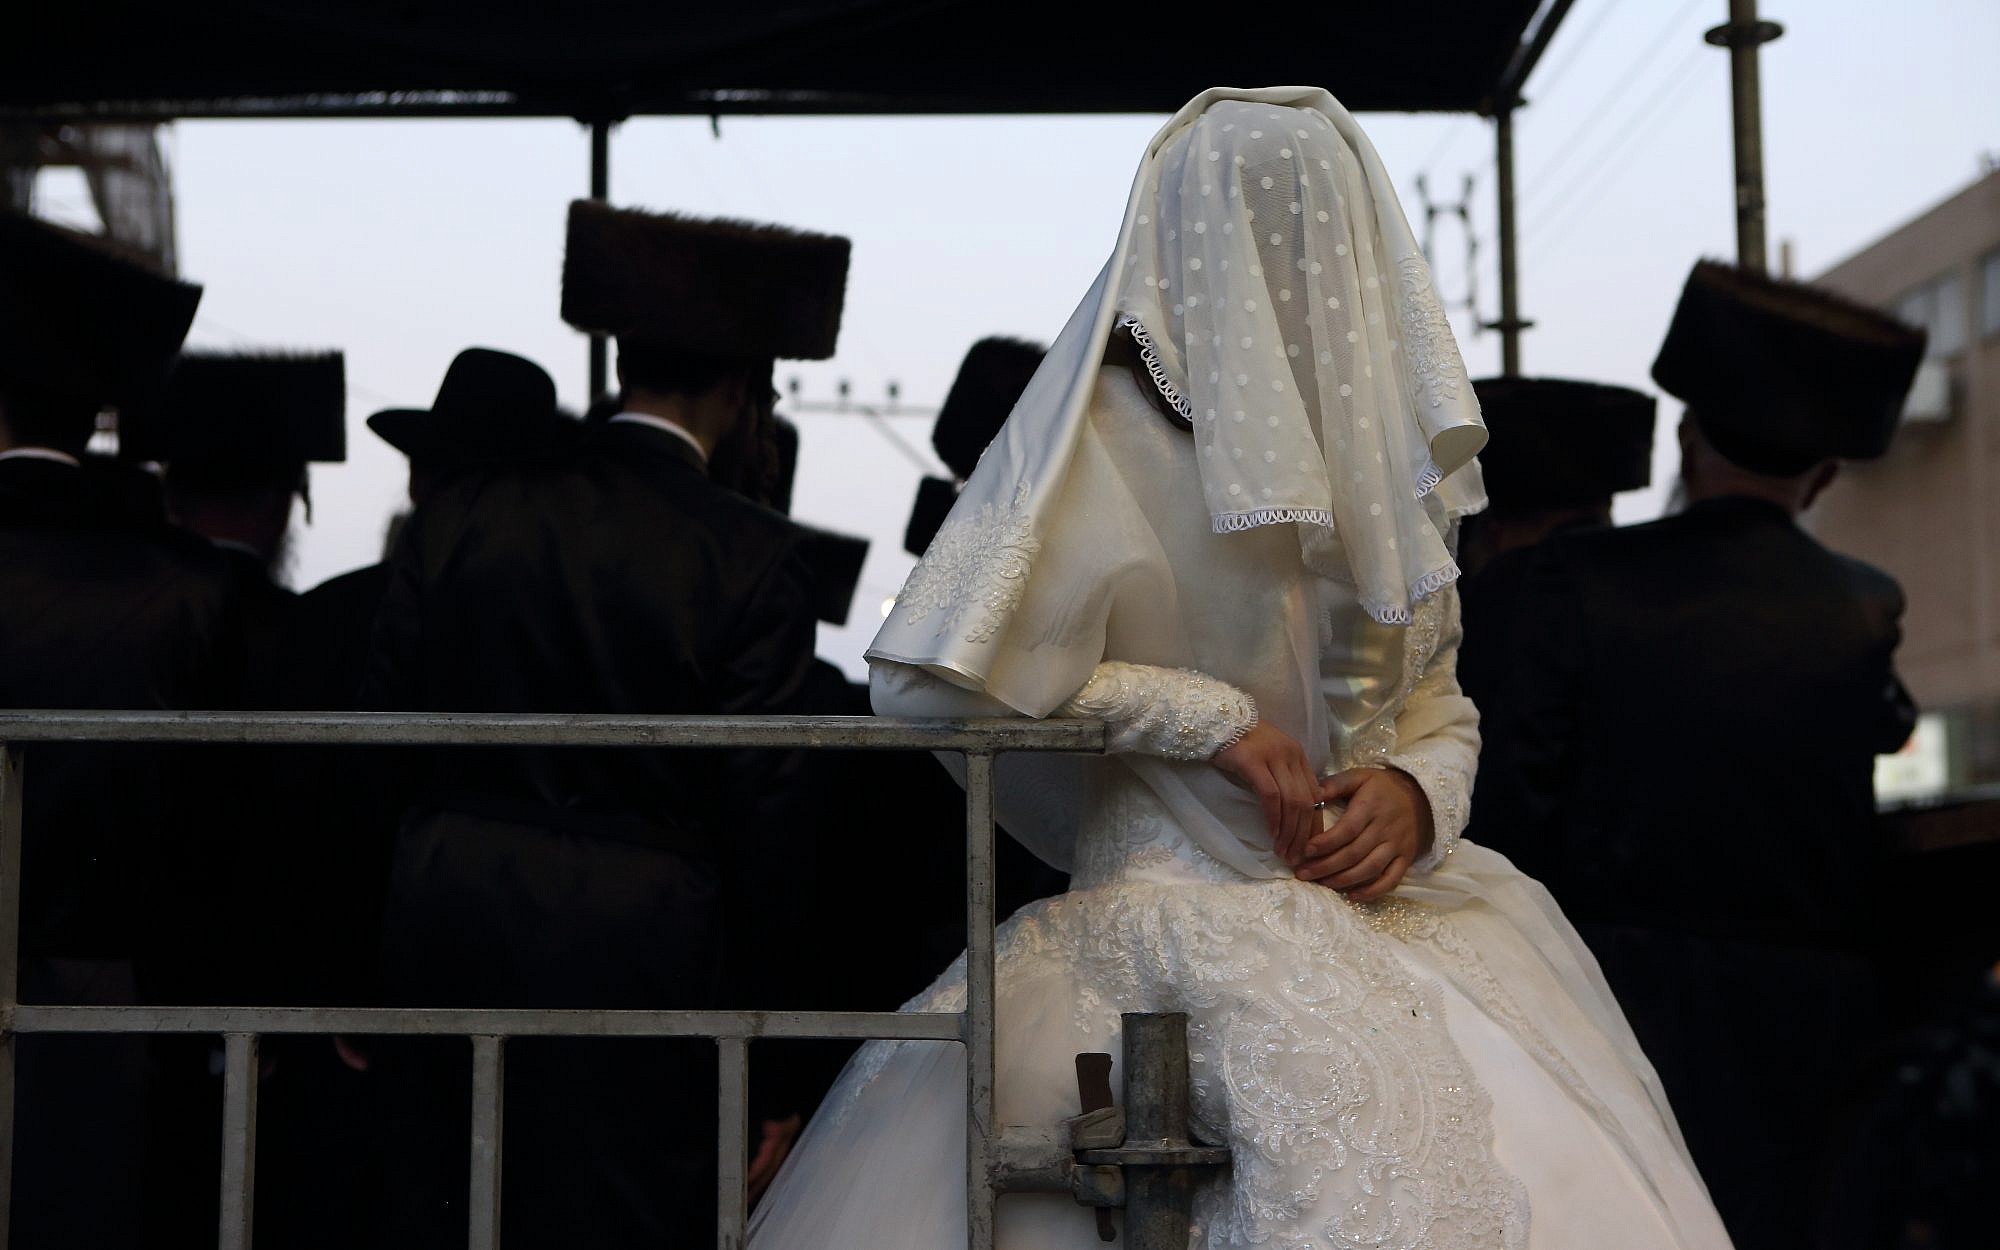 How Israeli ultra-Orthodox women have taken back their reproductive rights The Times of Israel pic